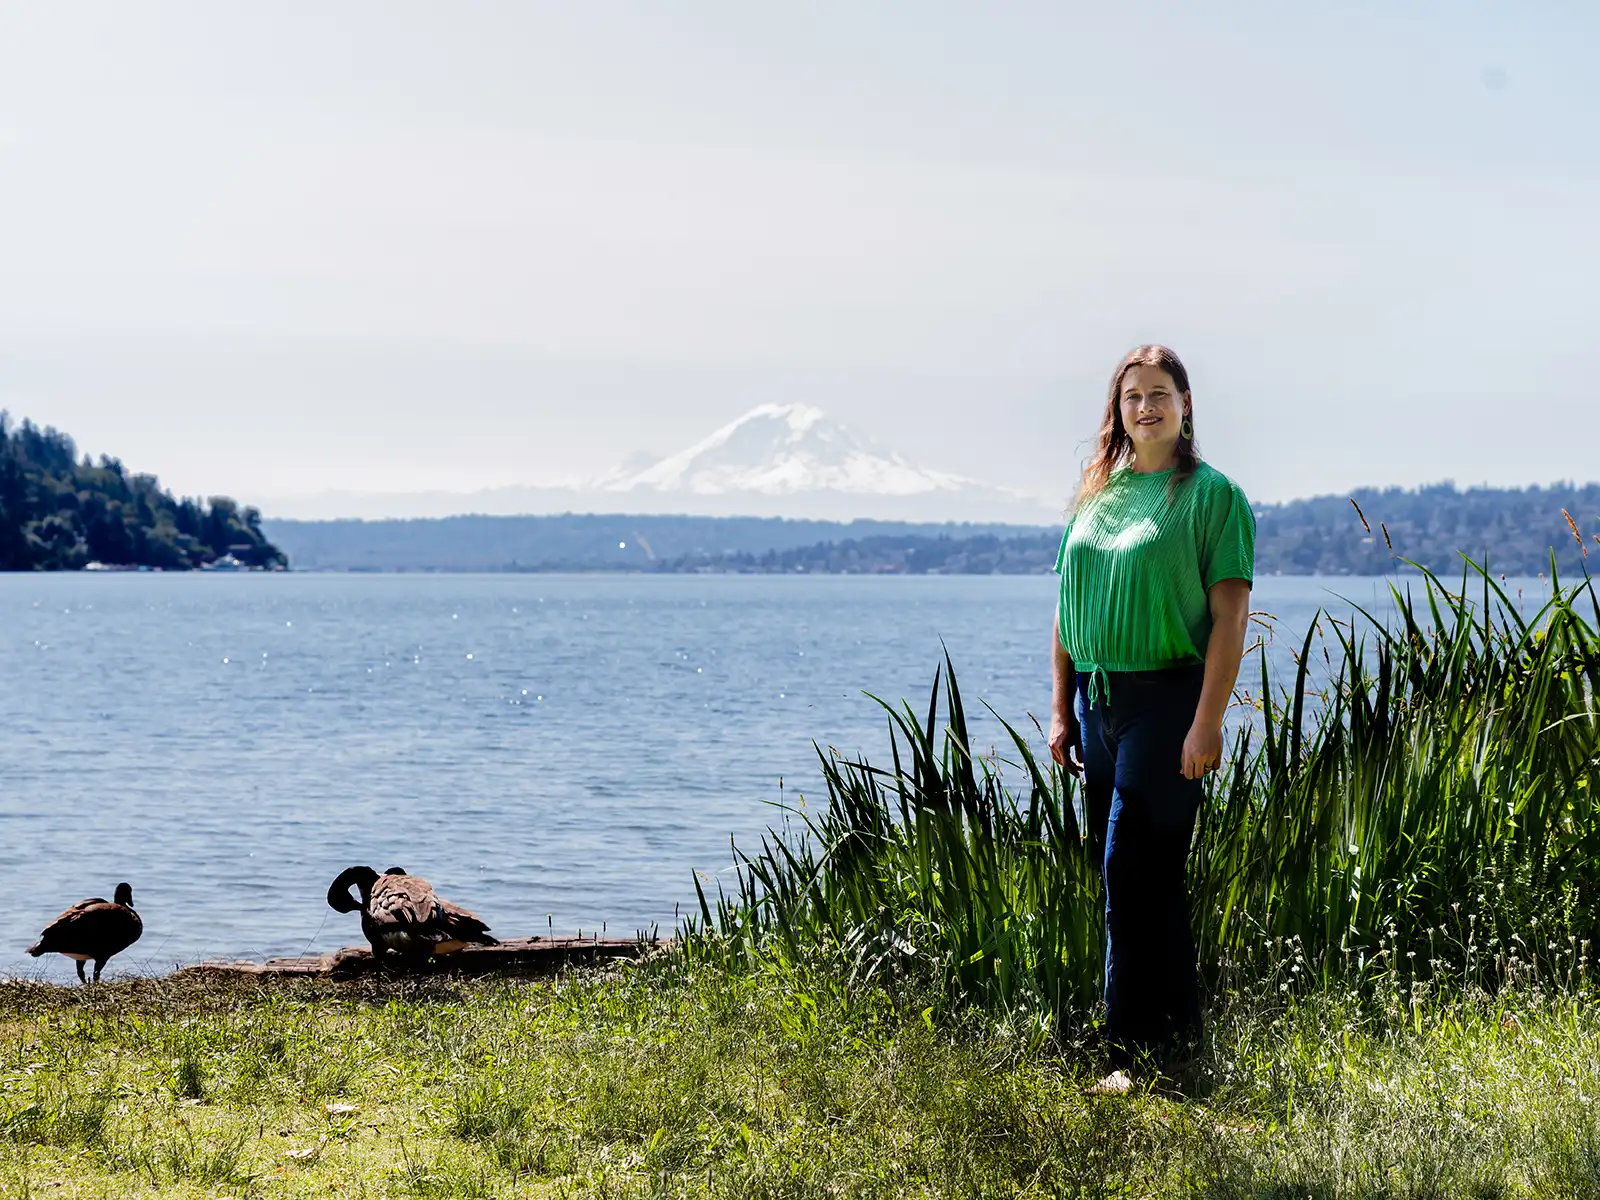 Autumn Palfenier stands on a lake shore with Mount Rainier visible in the distance.